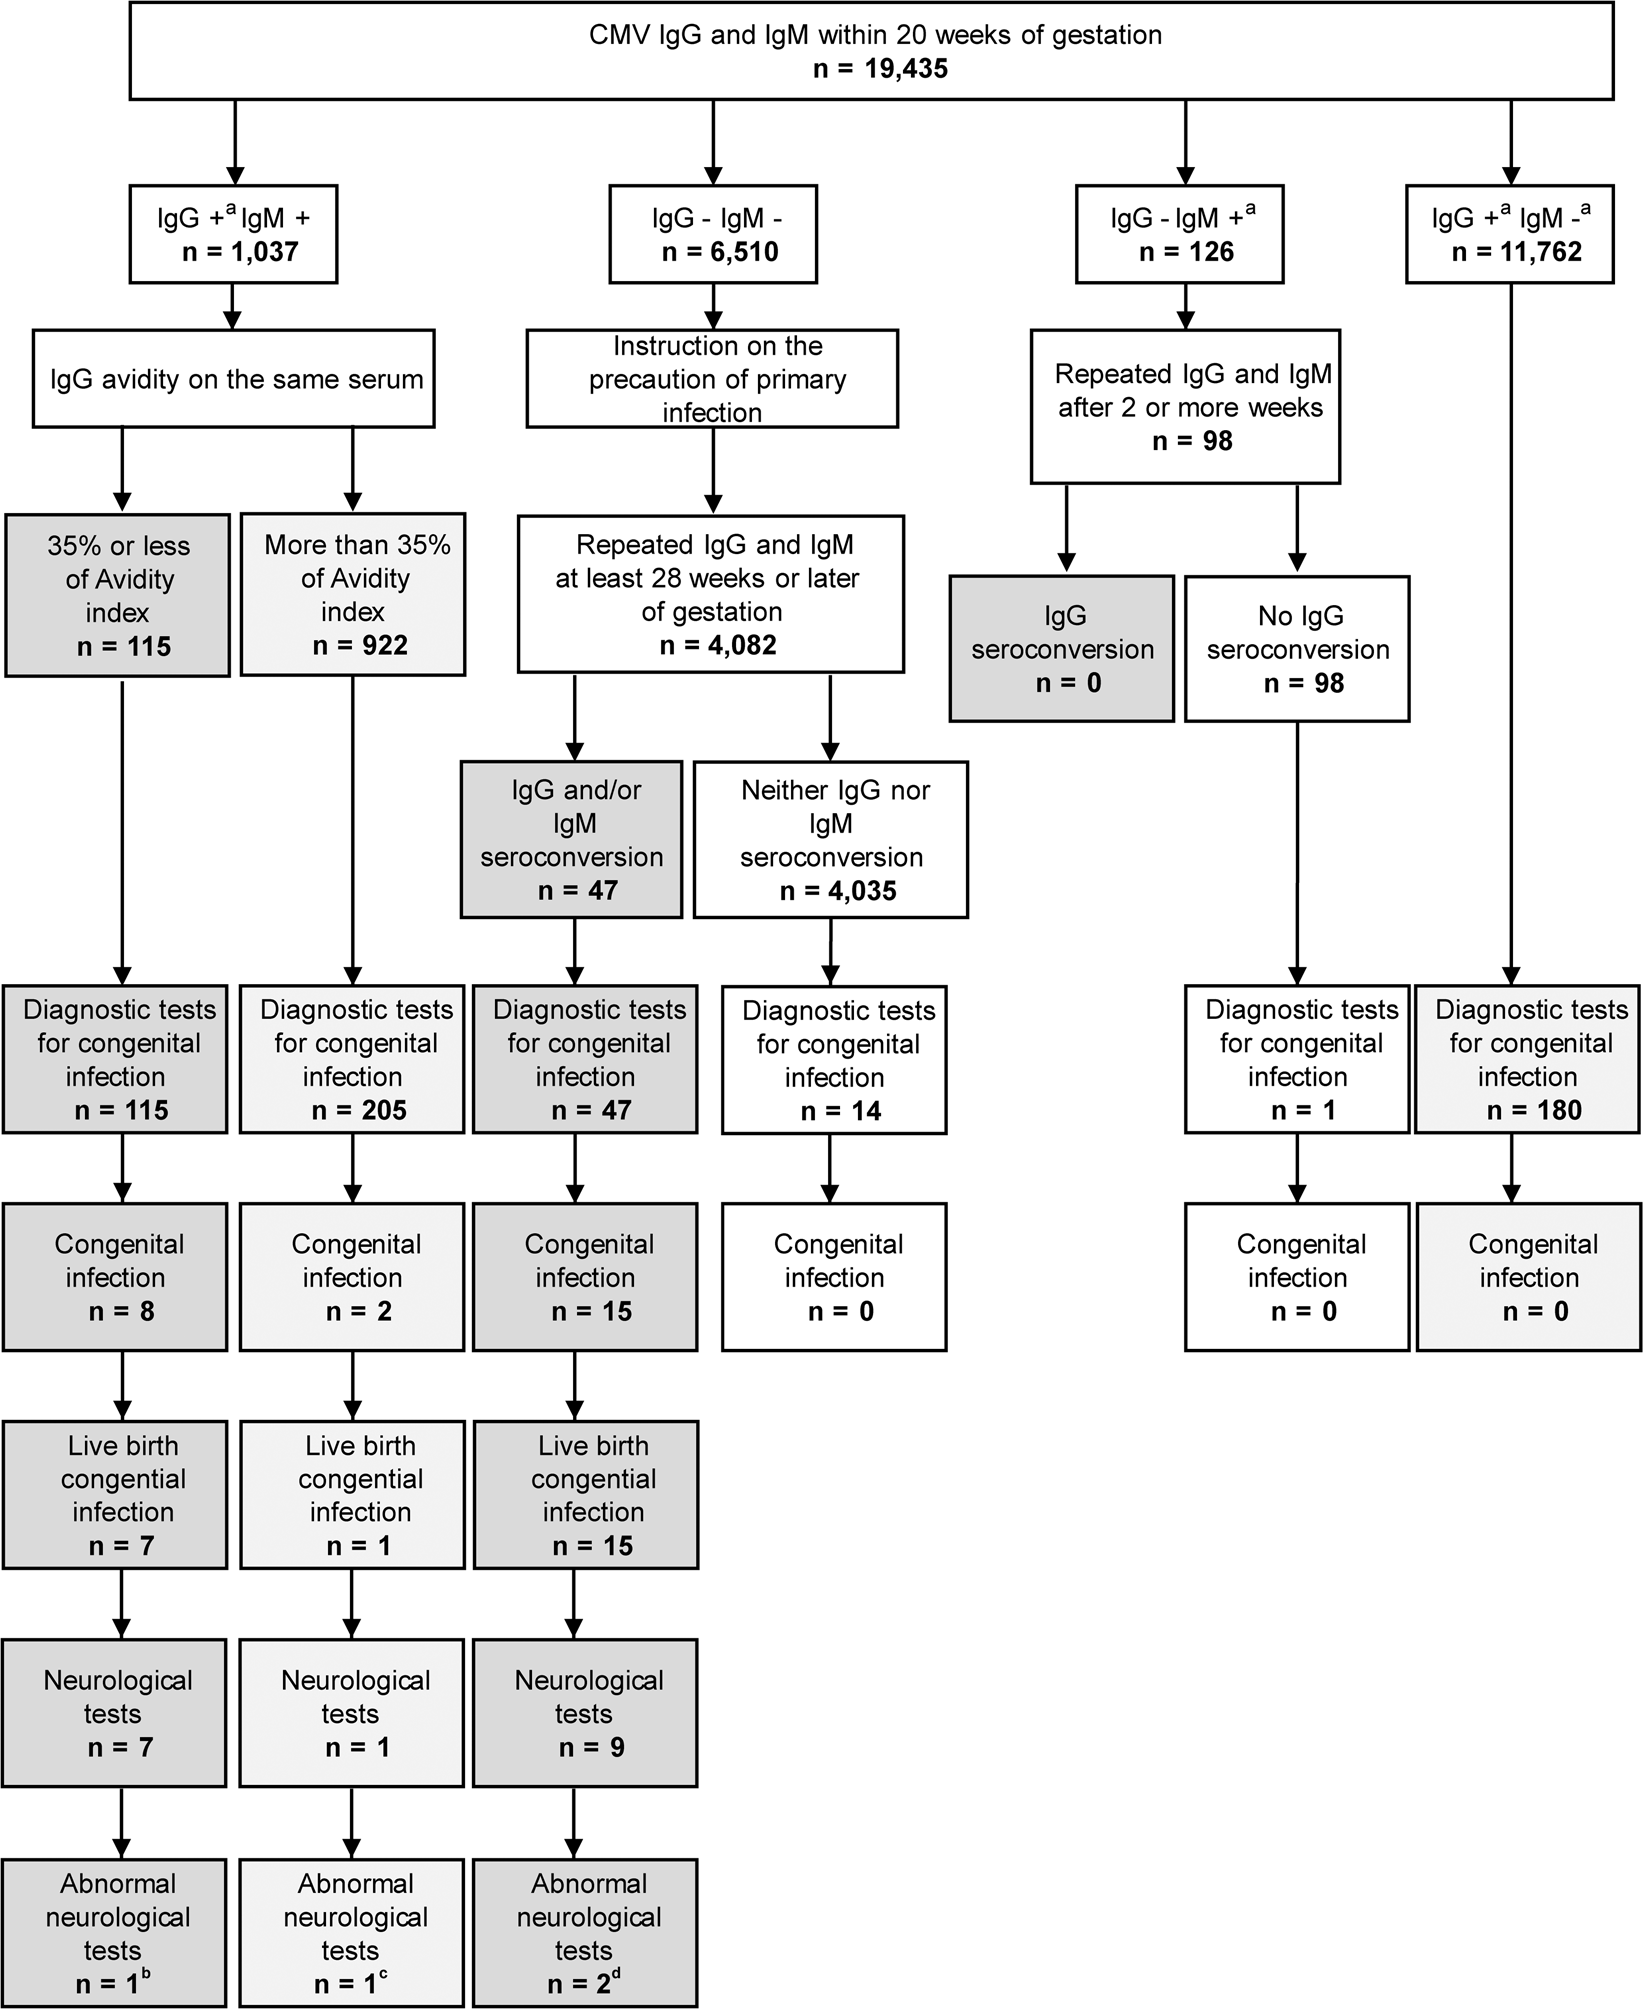 Primary cytomegalovirus infection during pregnancy and congenital  infection: a population-based, mother–child, prospective cohort study |  Journal of Perinatology